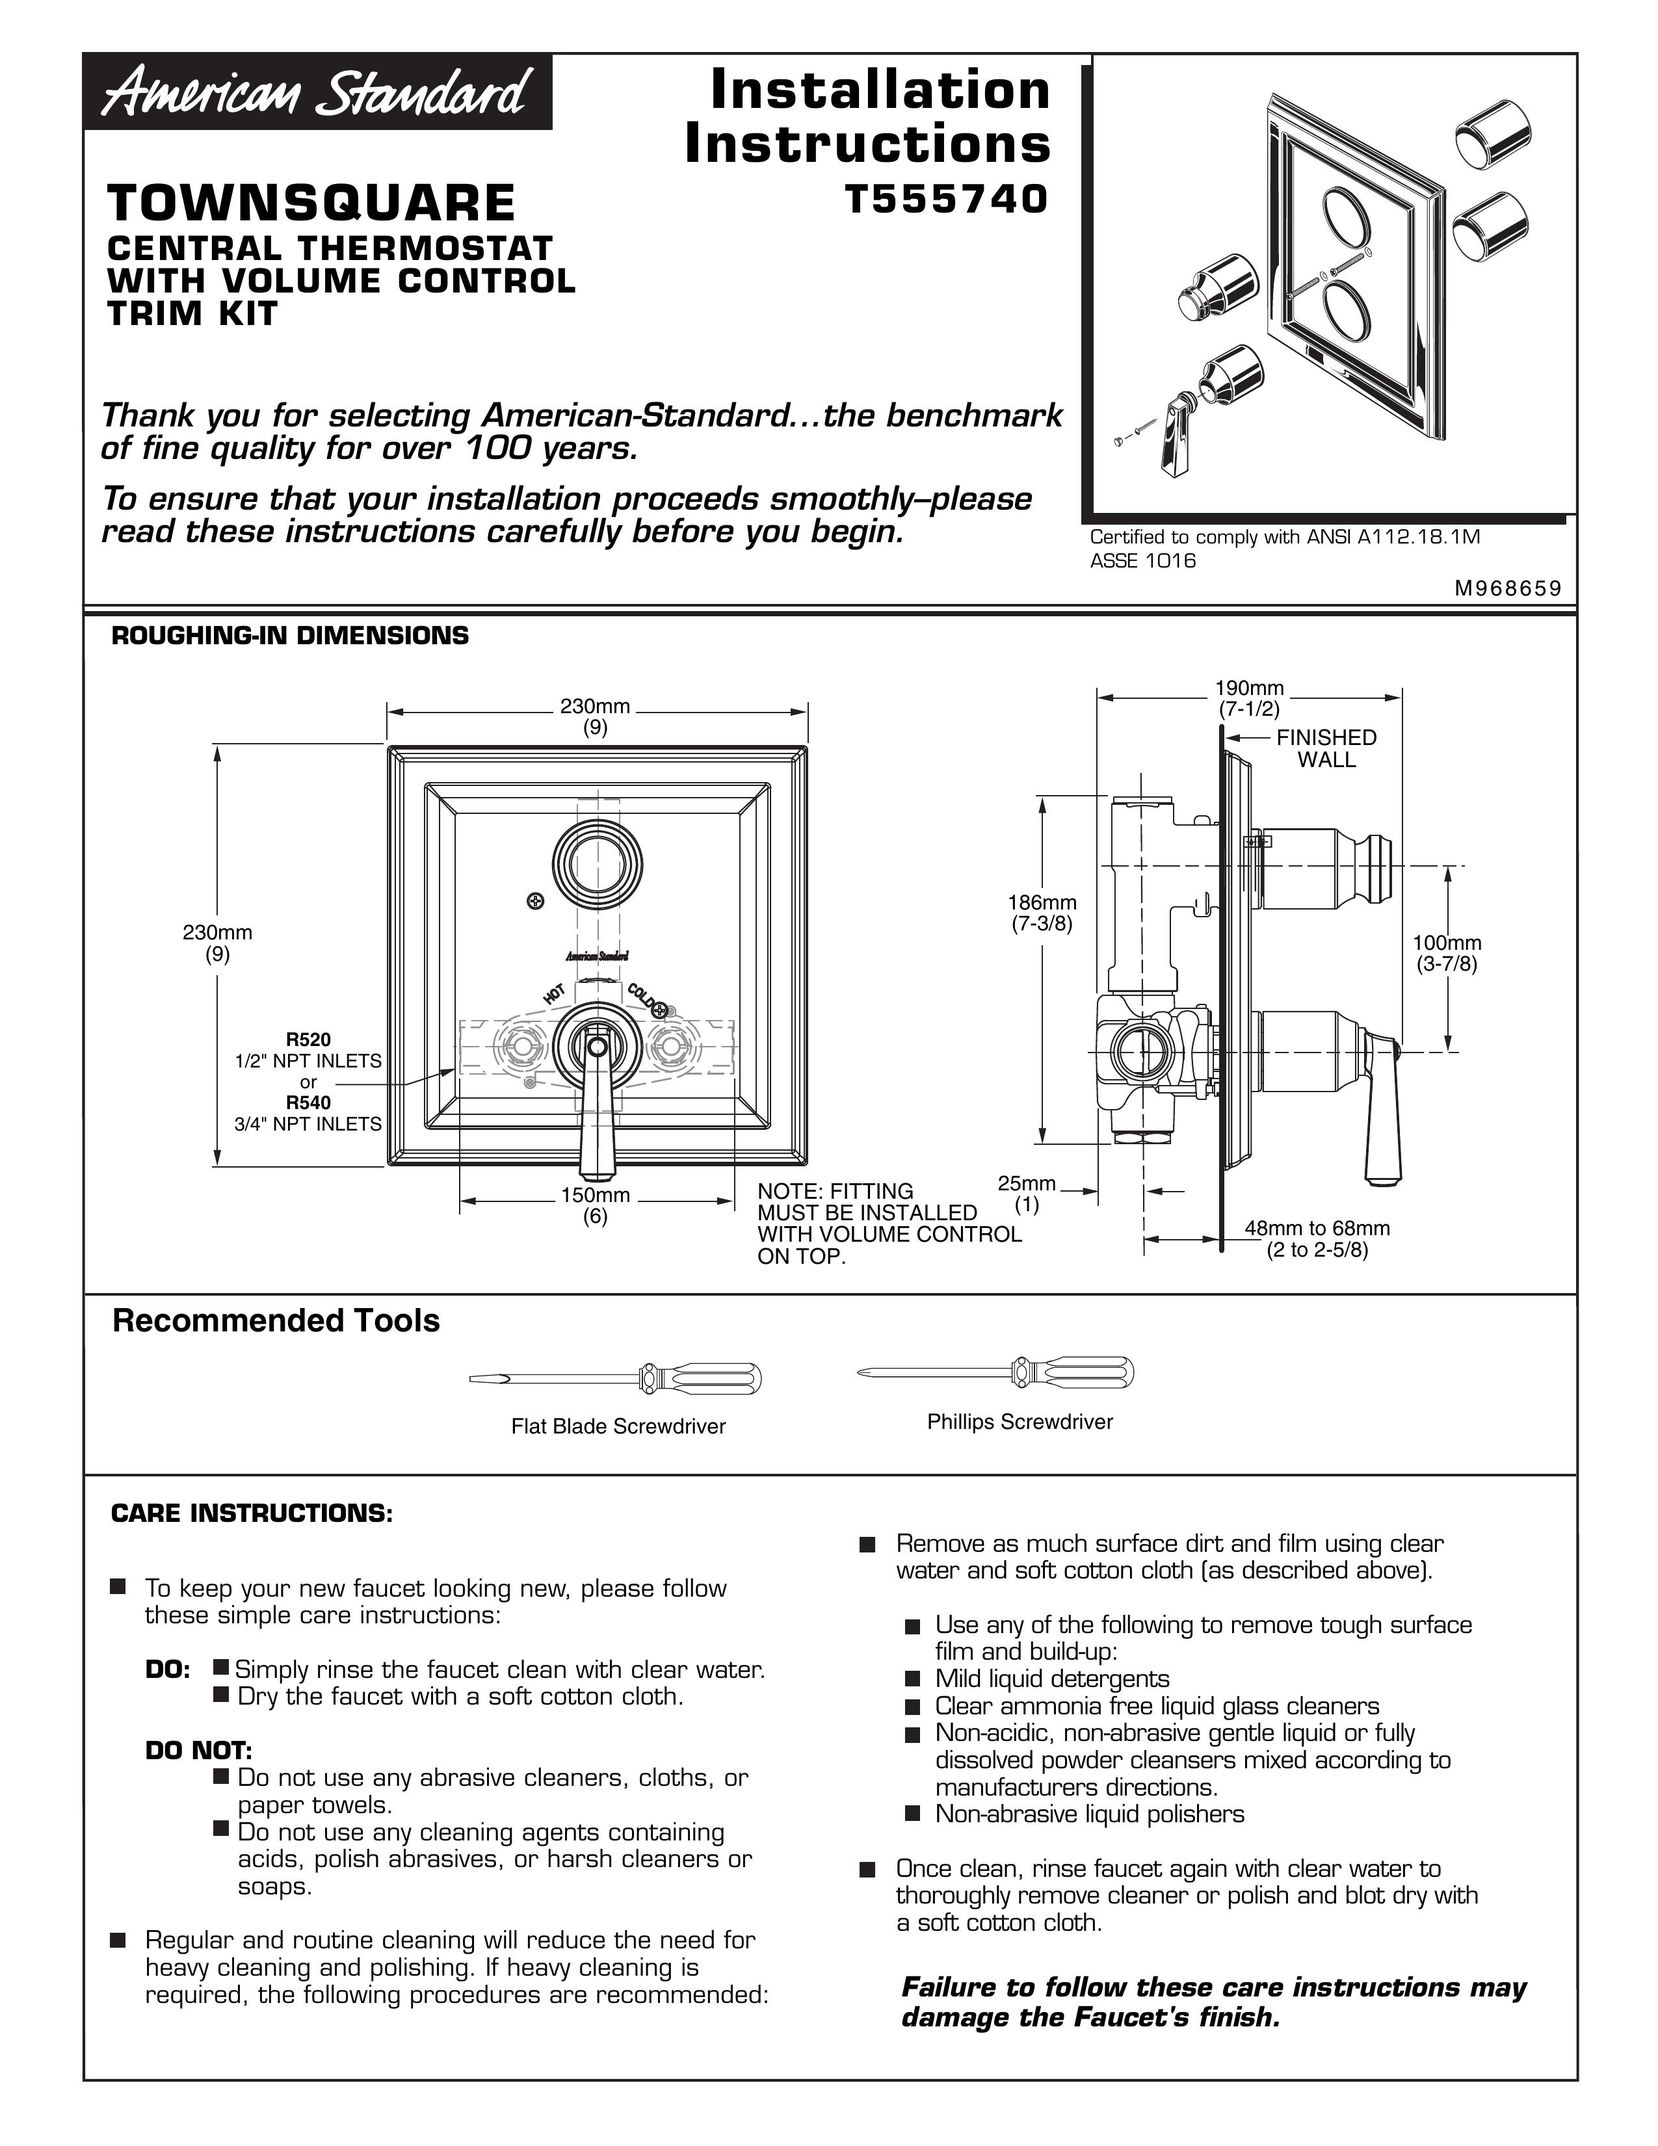 American Standard T555740 Thermostat User Manual